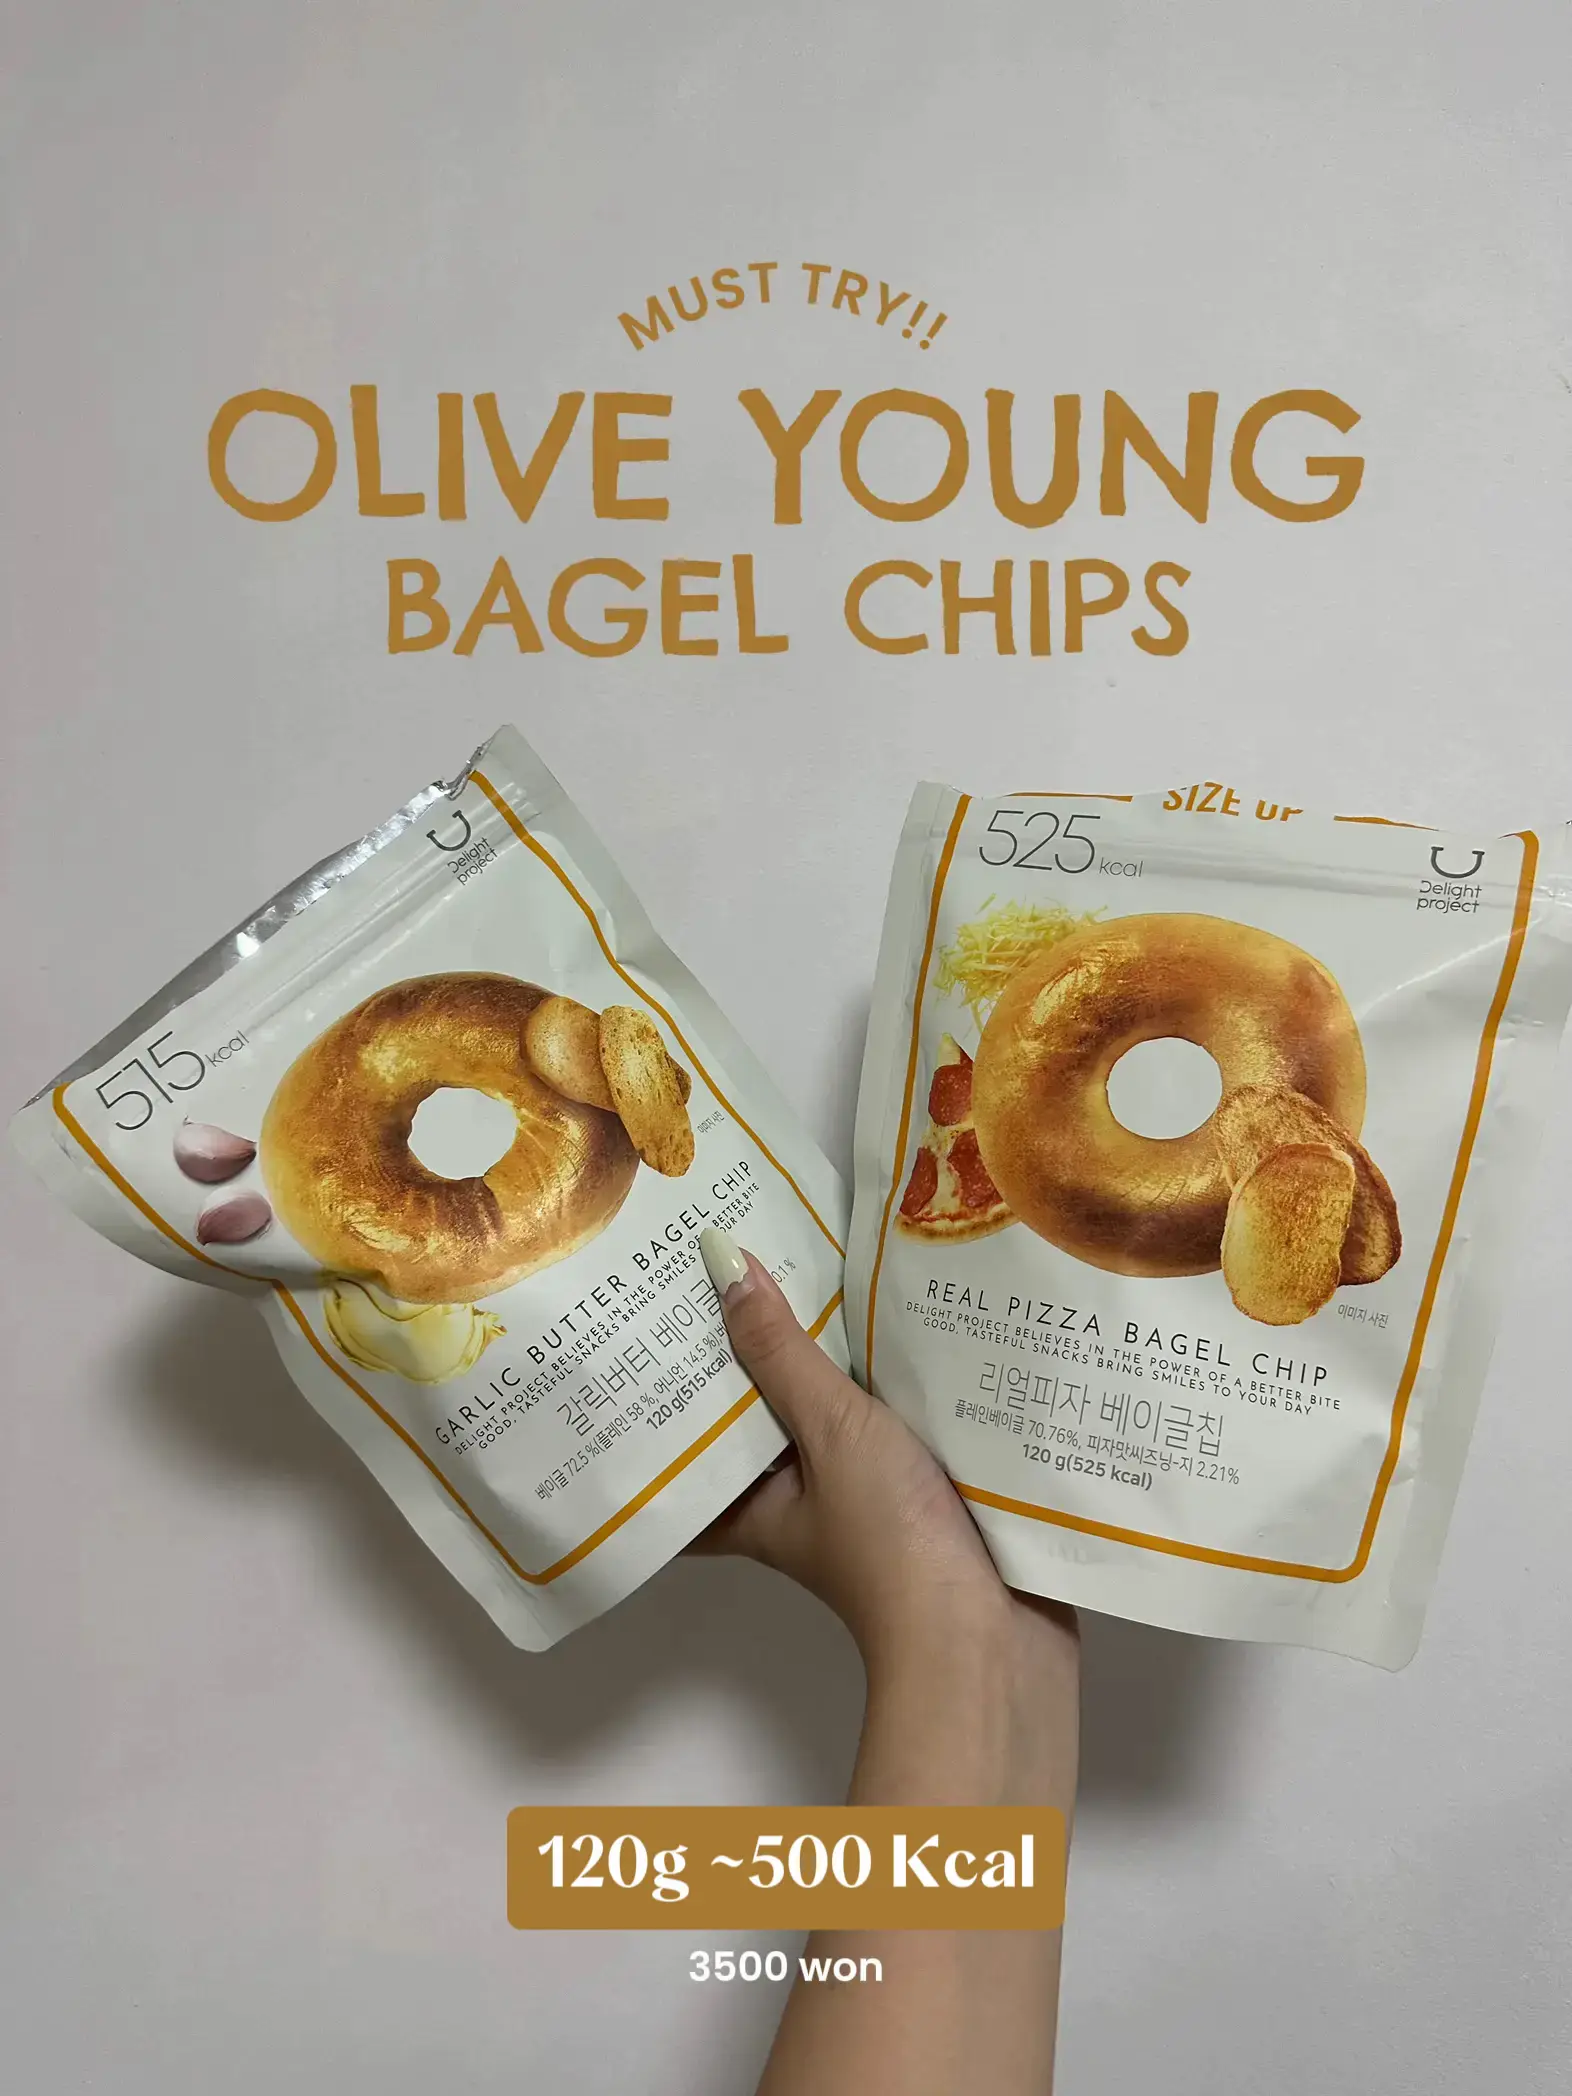 TRYING THE OLIVE YOUNG BAGEL CHIPS 😋🥯's images(0)